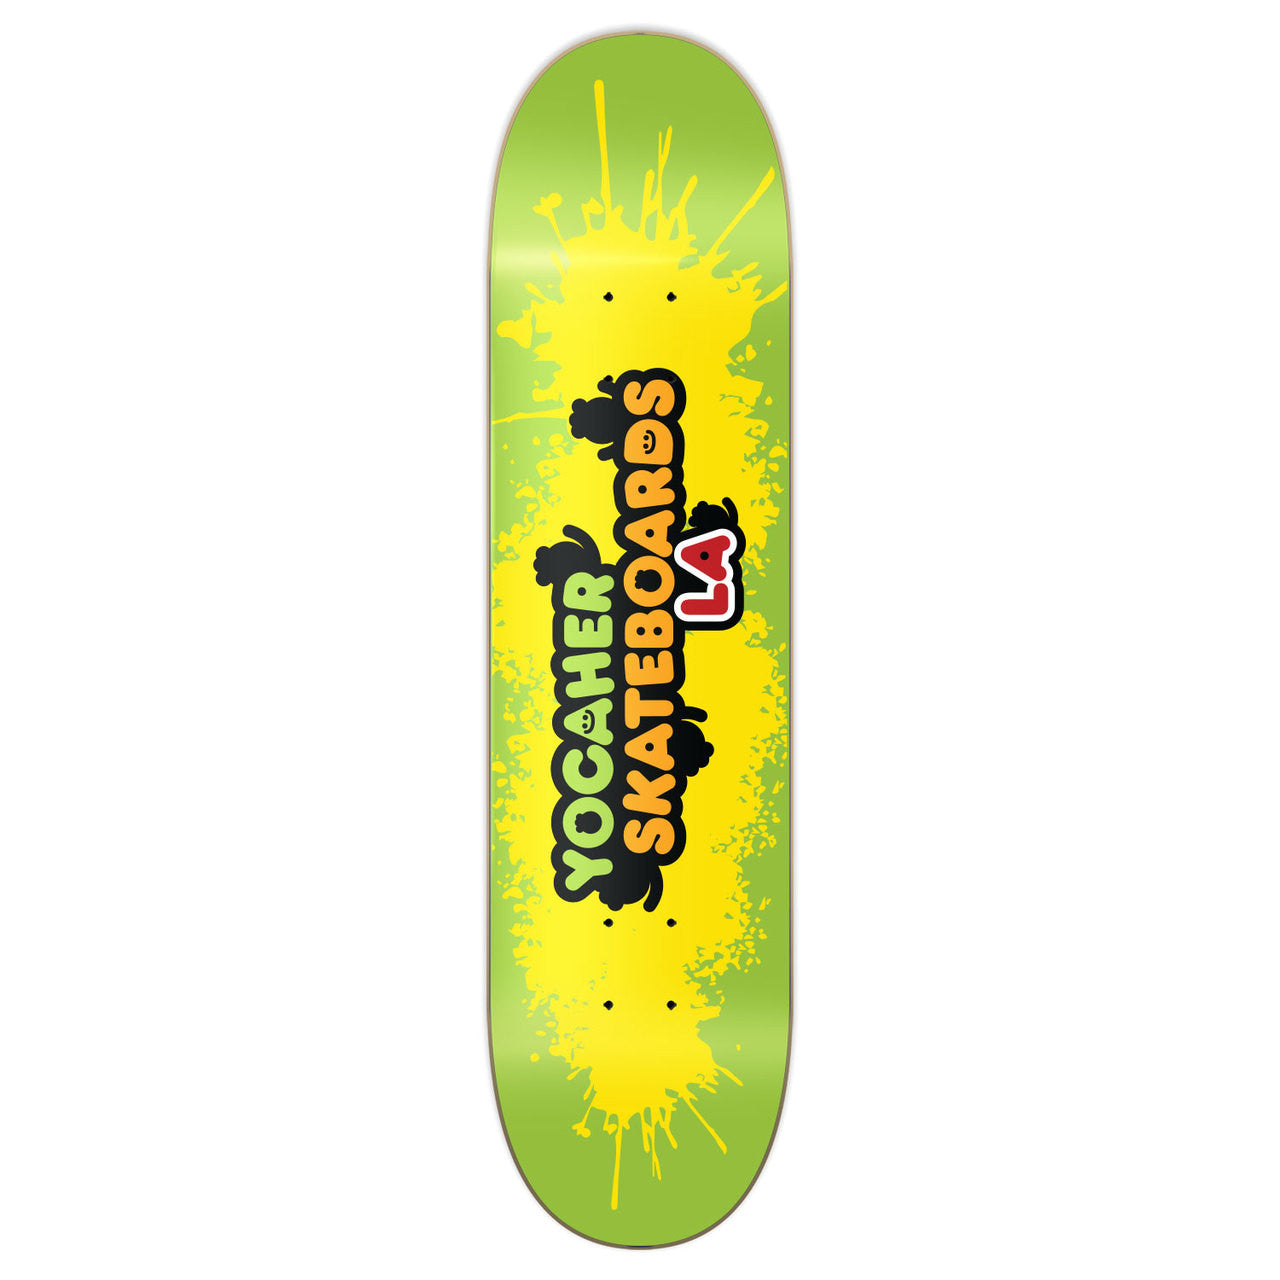 Yocaher Graphic Skateboard Deck - CANDY Series - Sour